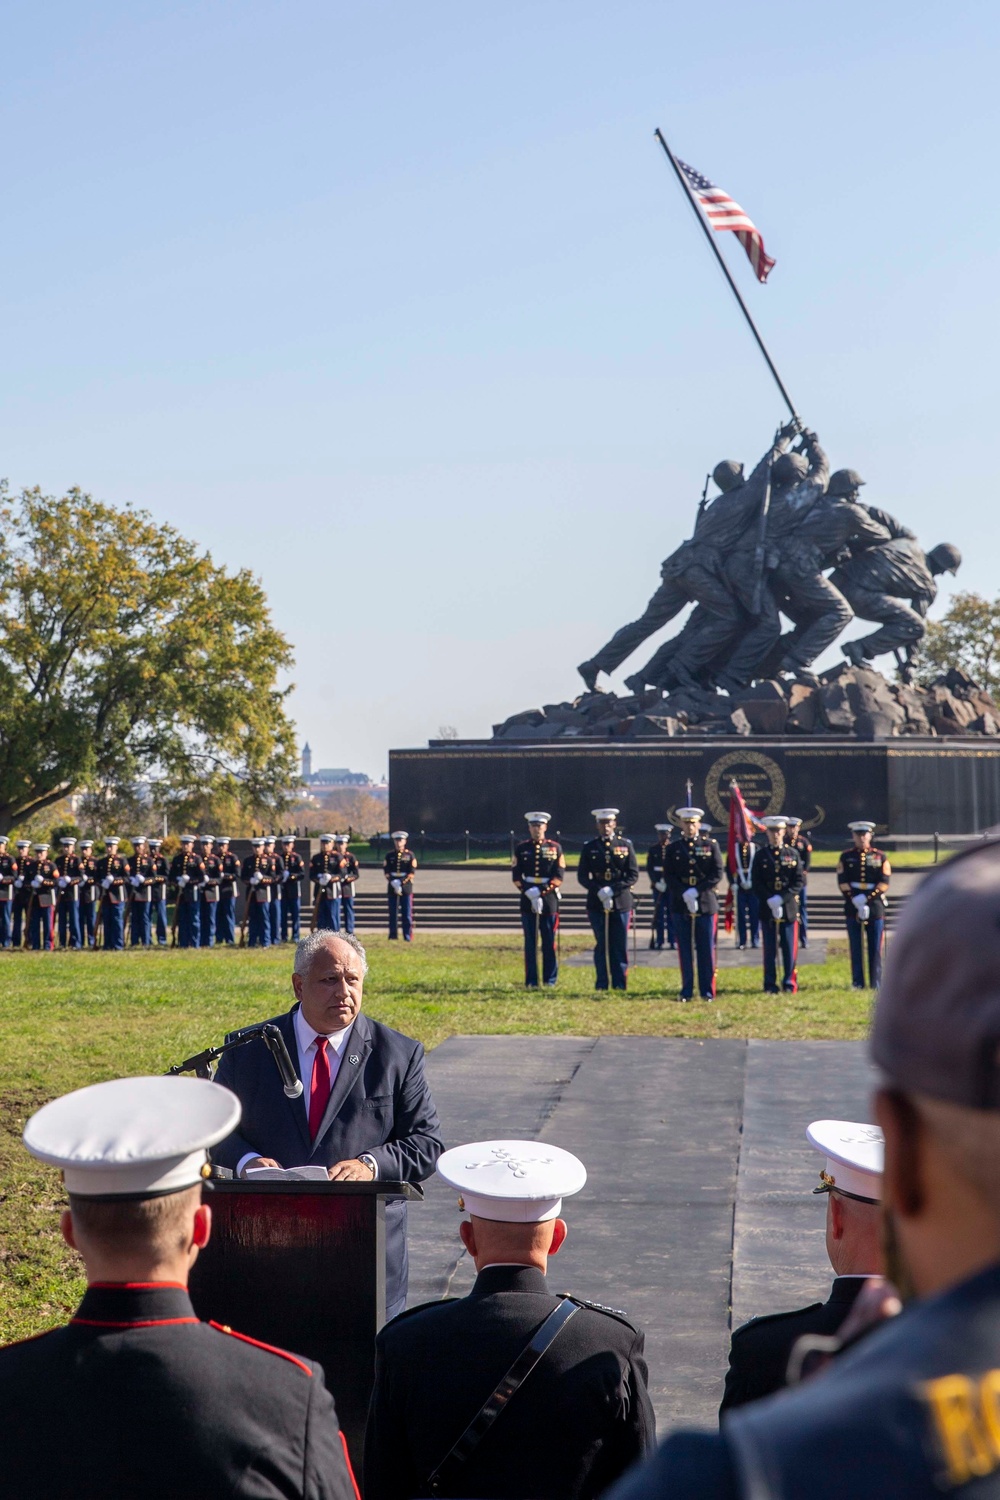 Marine Corps celebrates 246th anniversary with wreath laying ceremony